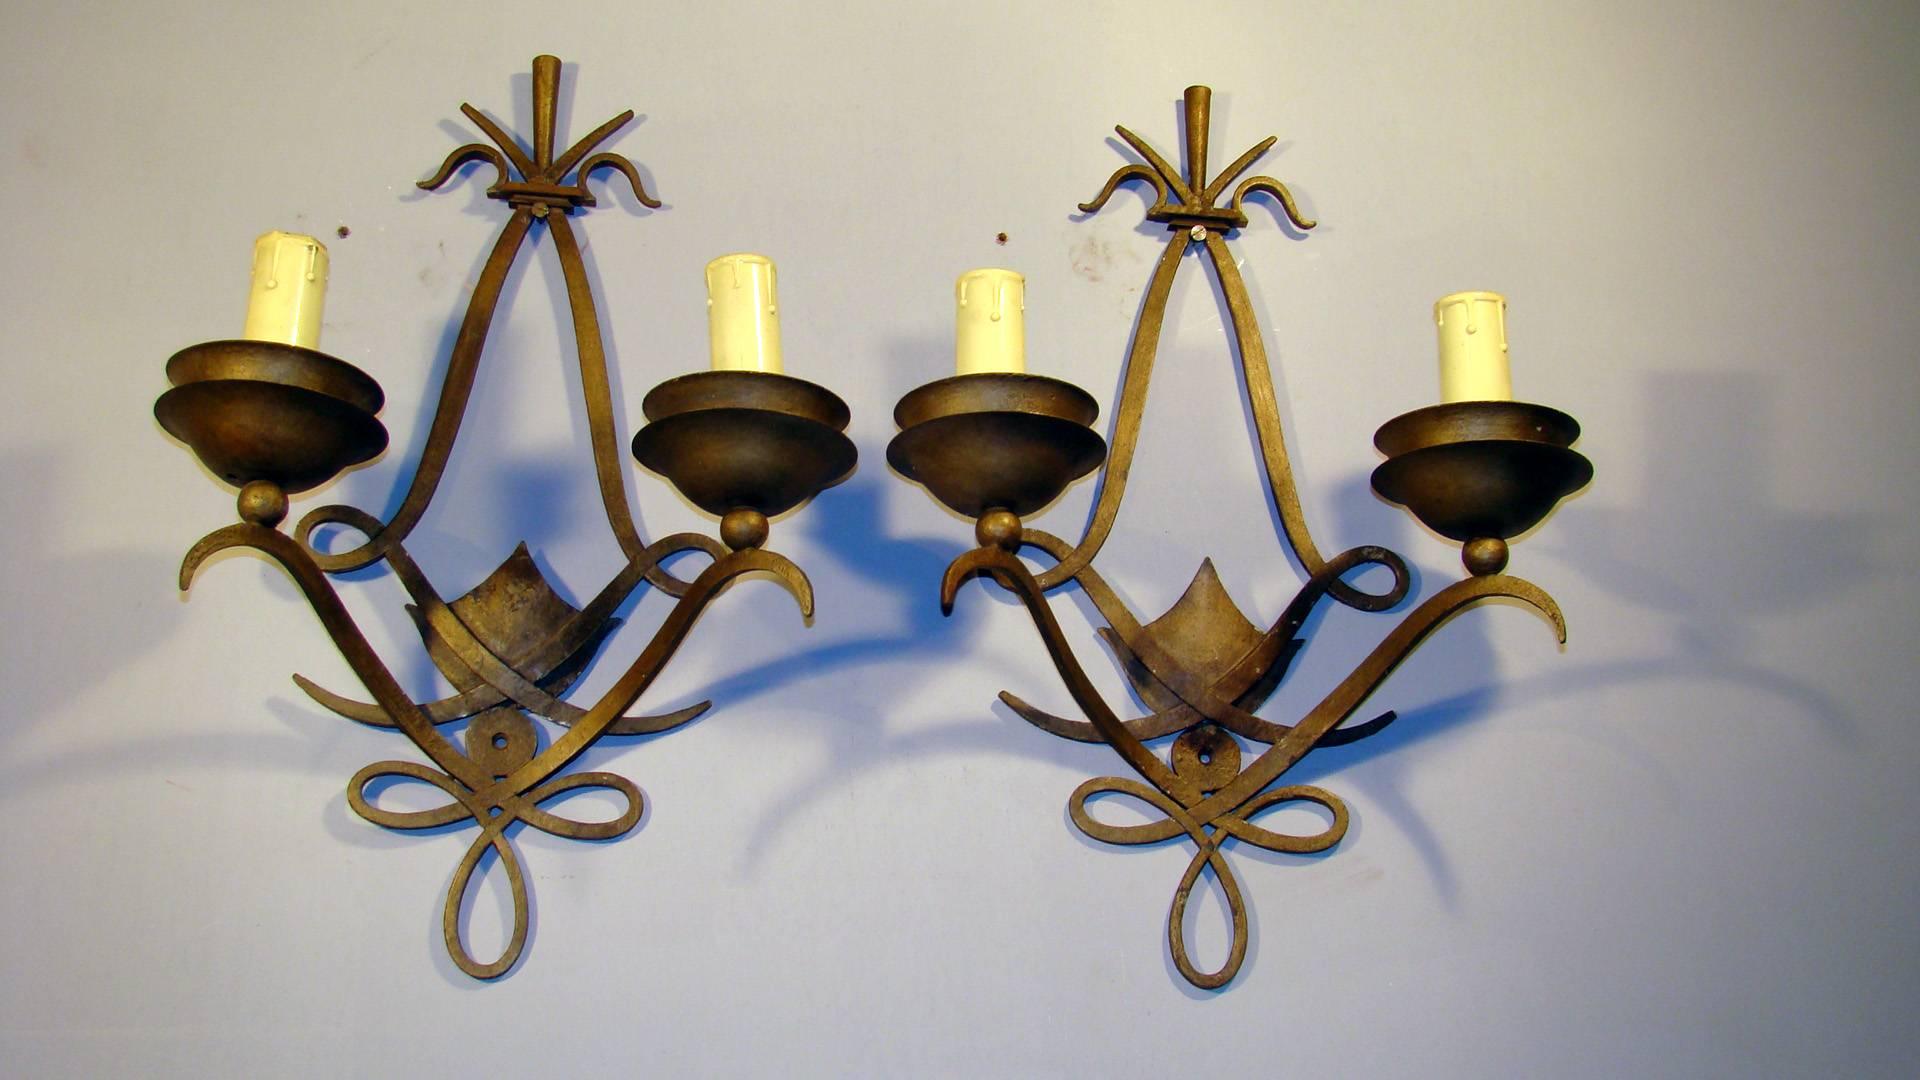 Wrought Iron Pair of Art Deco Poillerat Style Wall Sconces, French, 1940s